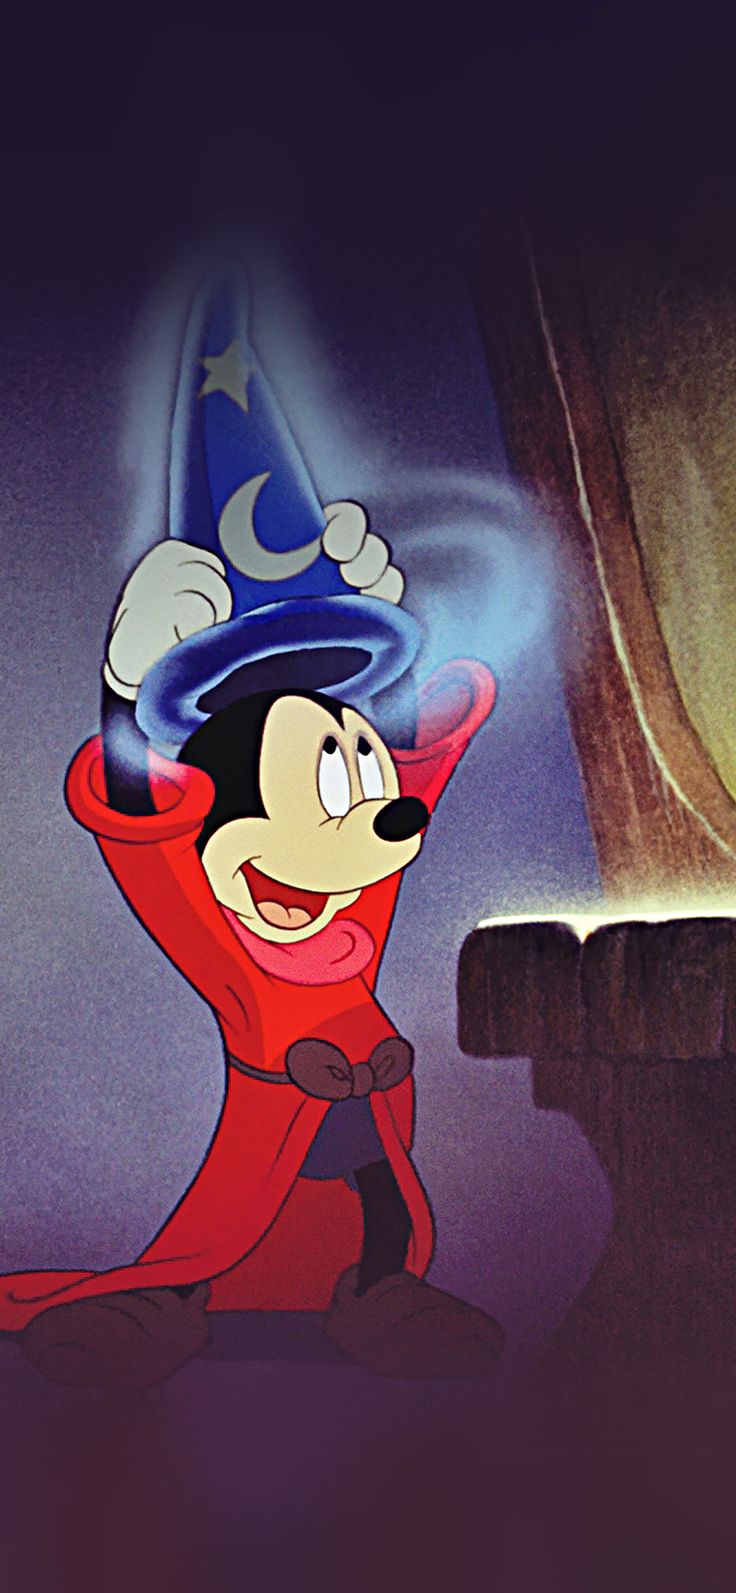 Sorcerer Mickey. Mickey mouse wallpaper iphone, Mickey mouse wallpaper, Cartoon wallpaper hd